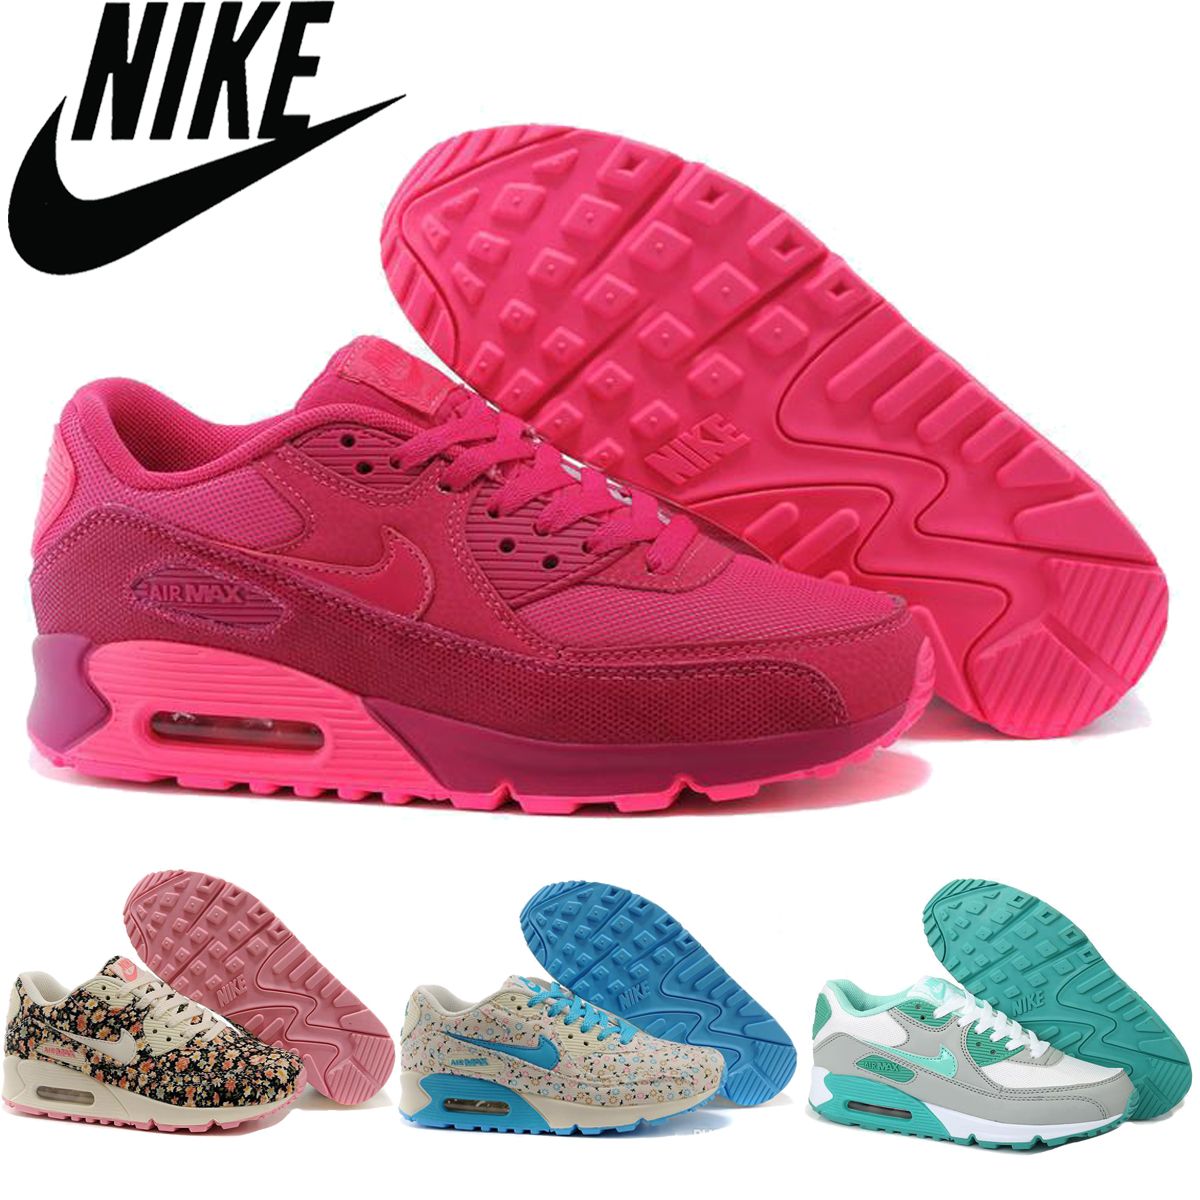 Nike Air Max 90 Running Shoes Women Hot Cheap MAX Athletic Shops Descuento